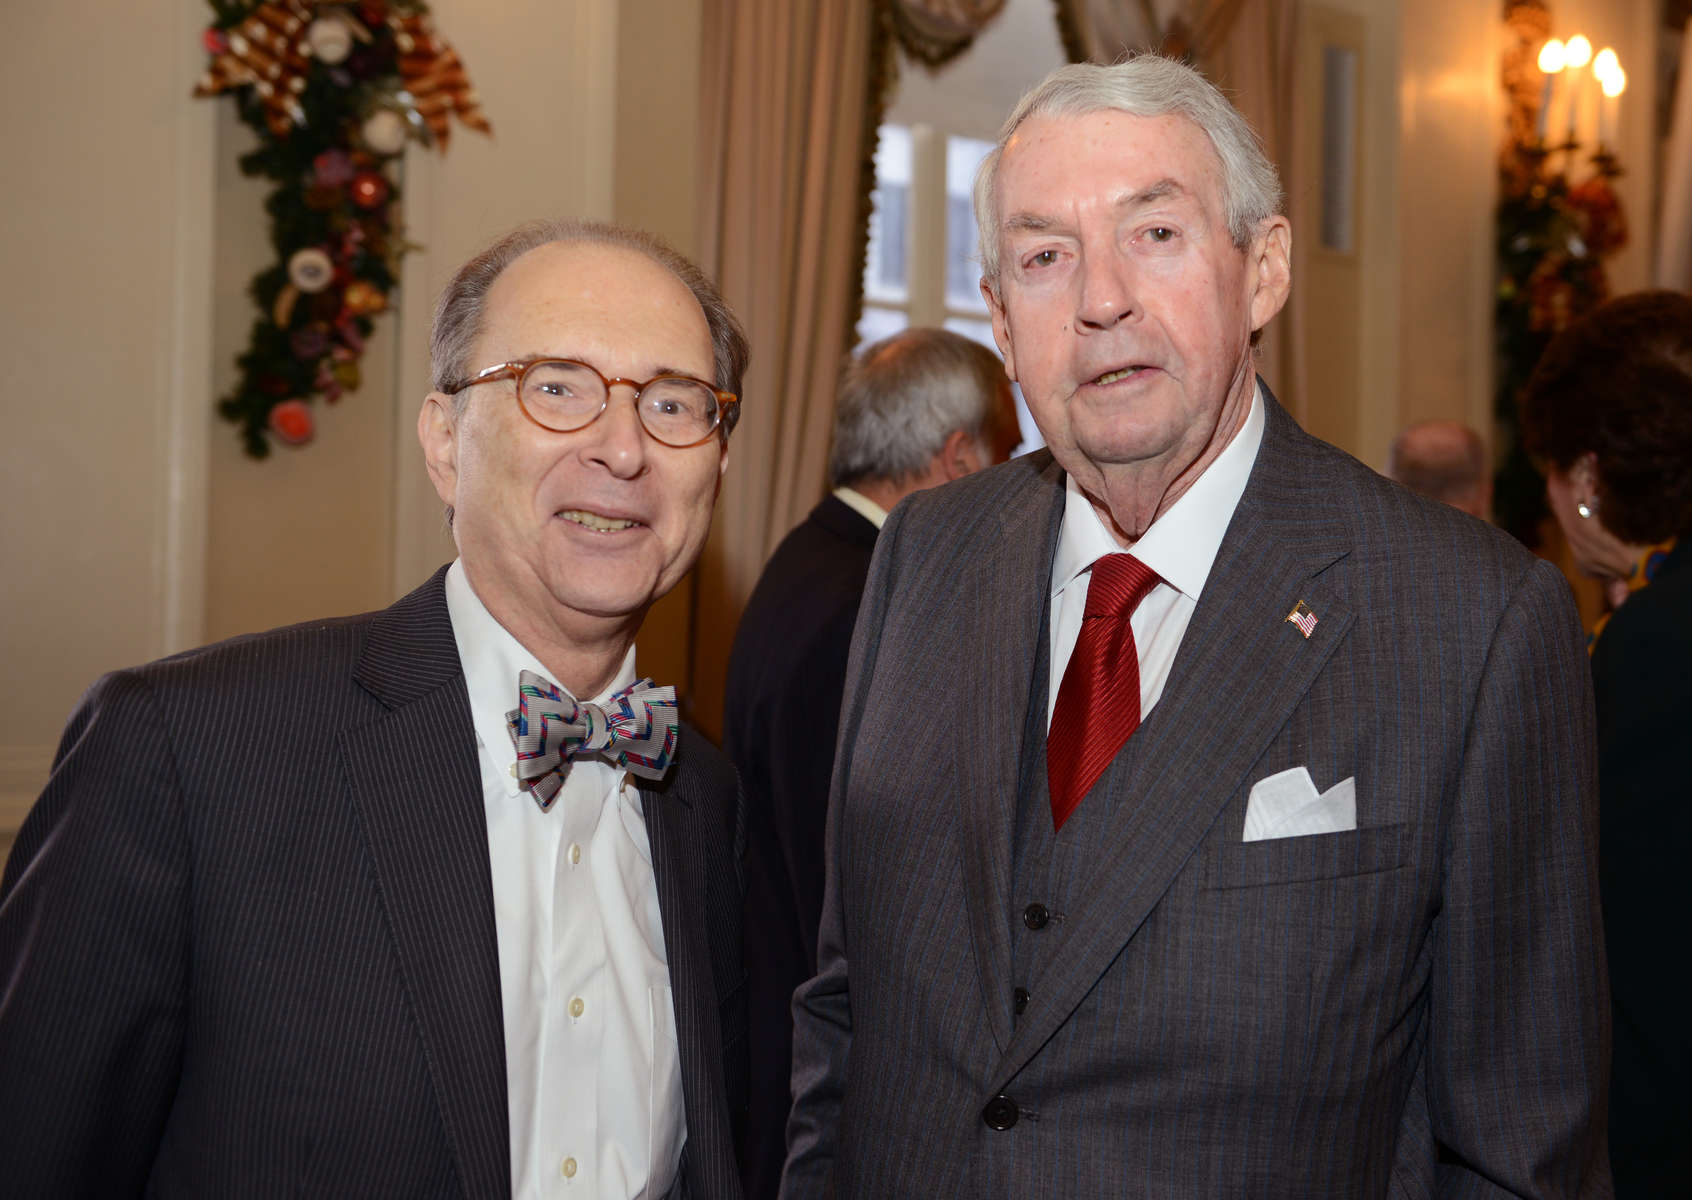 Barry Kamins-Administrative Judge, left and J. Charles Hynes-Brooklyn District Attorney at an event, November 28, 2013